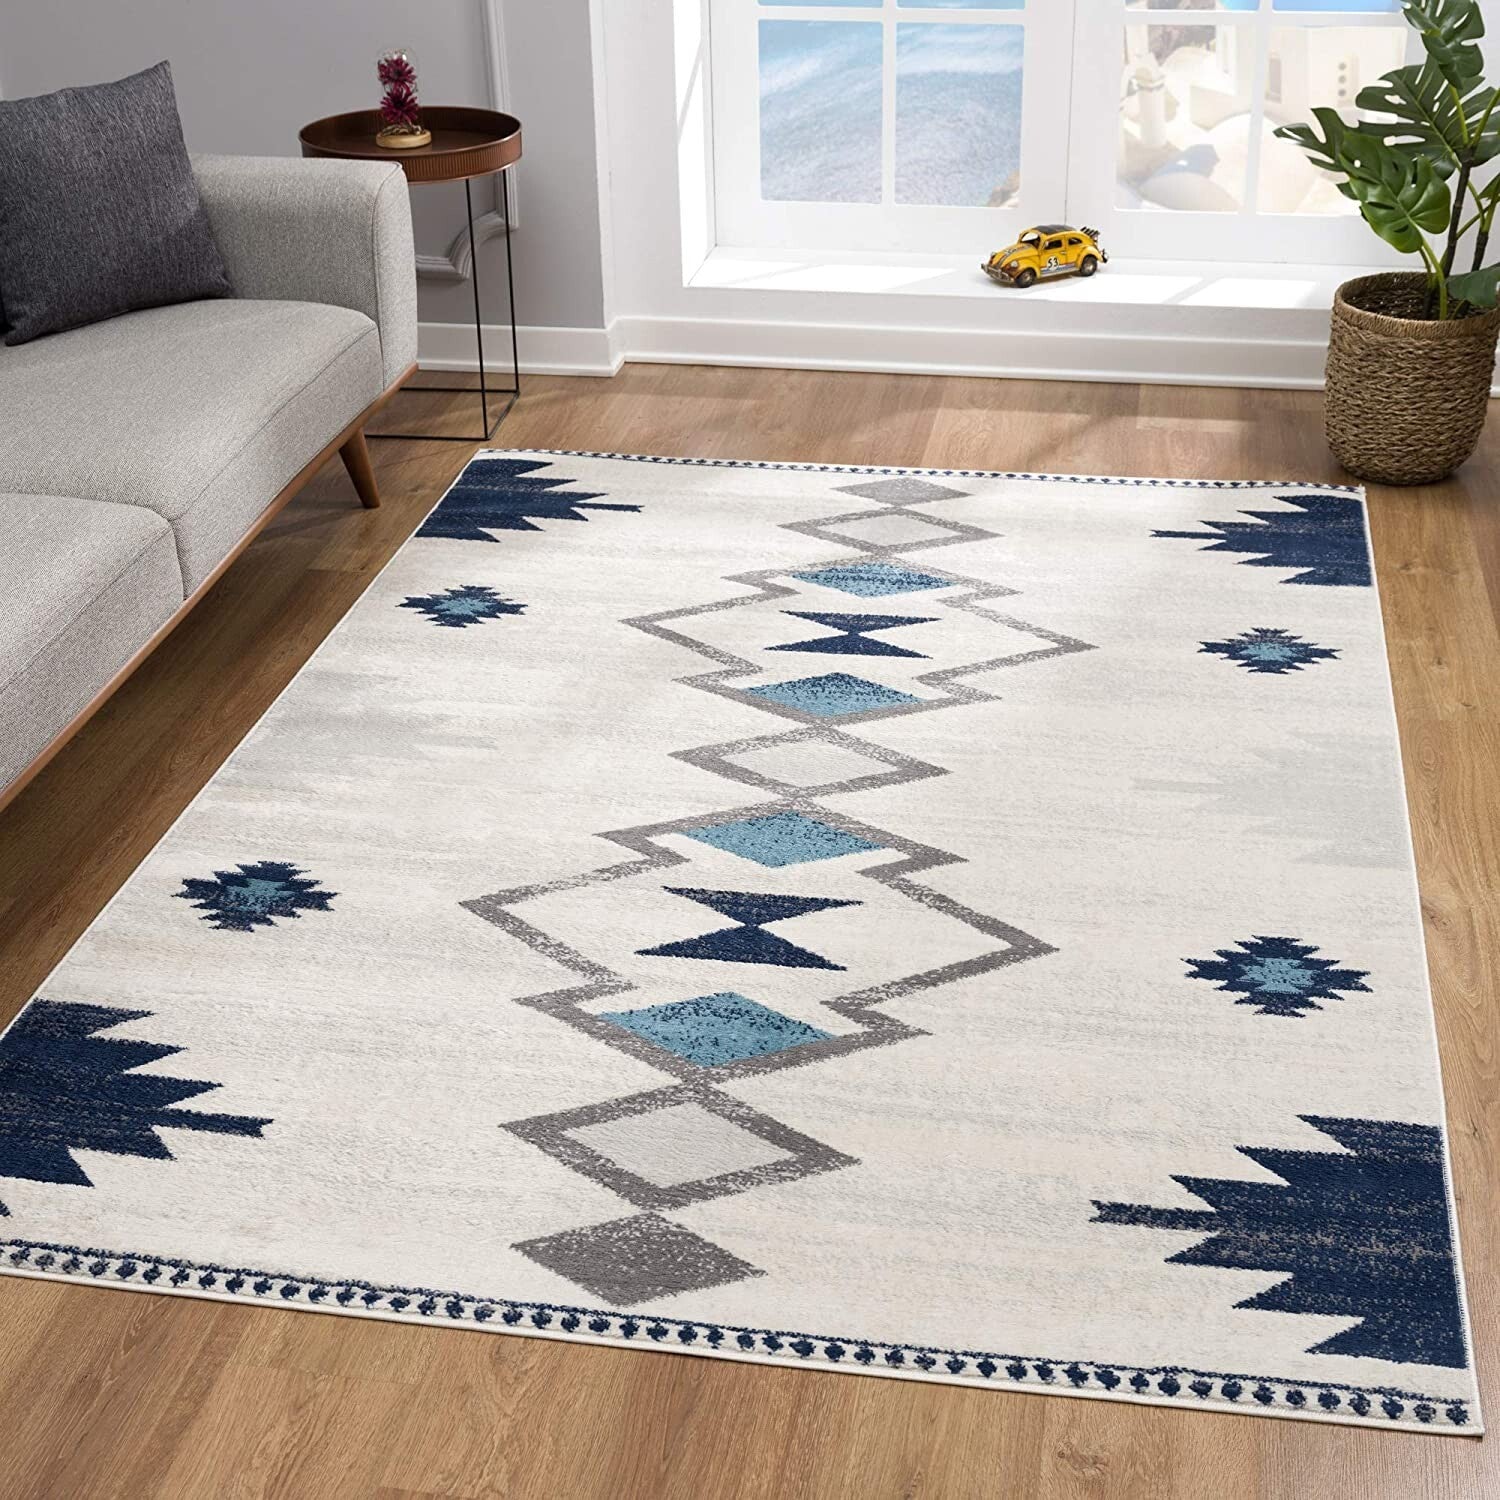 7' x 10' Navy and Ivory Tribal Pattern Area Rug - Team Spirit Store USA 